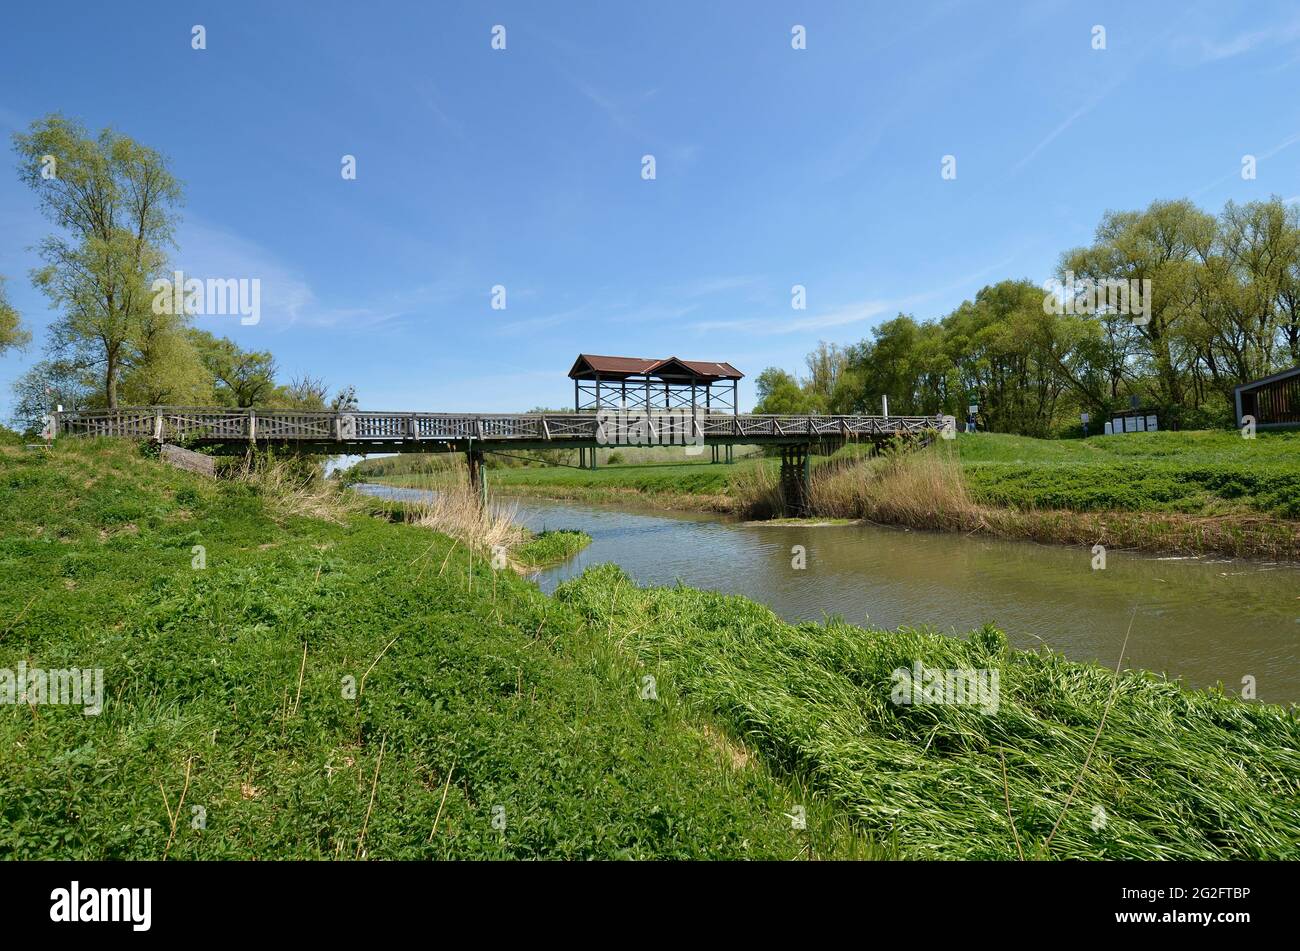 Austria, the rebuilt historical bridge of Andau - destroyed by Soviets - where the refugees from Hungary fled to Austria in 1956 from the Hungarian re Stock Photo